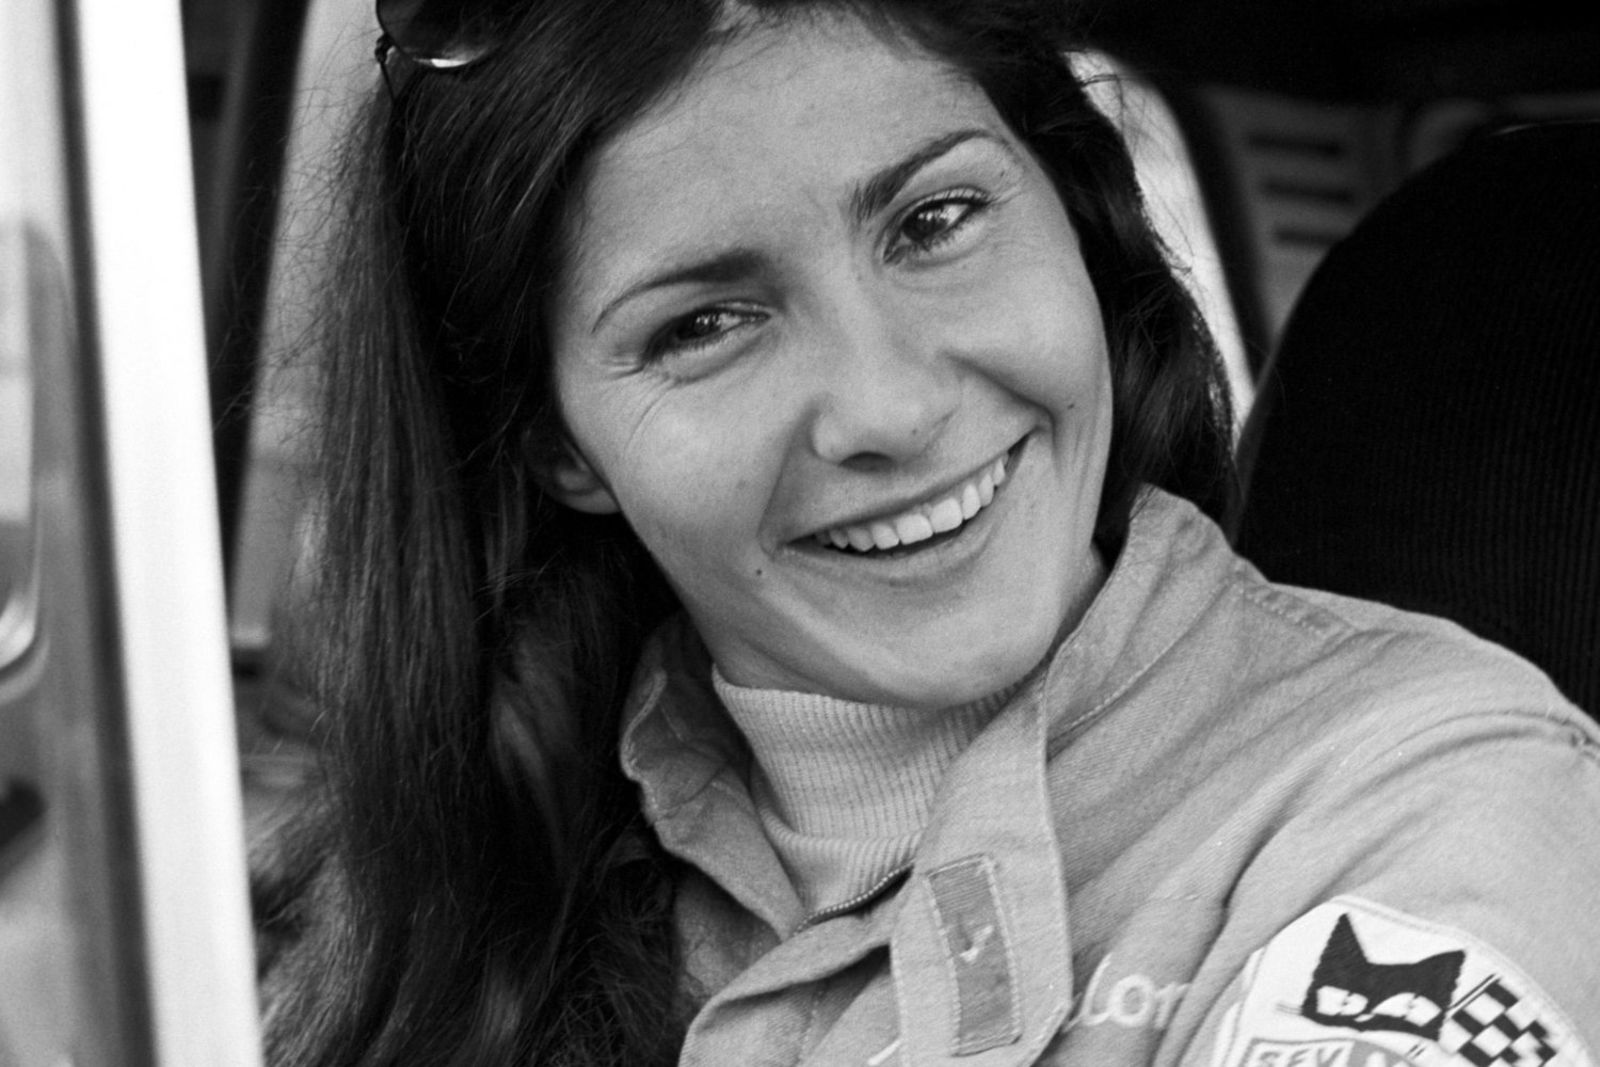 Greatest Woman to Race: Michele Mouton